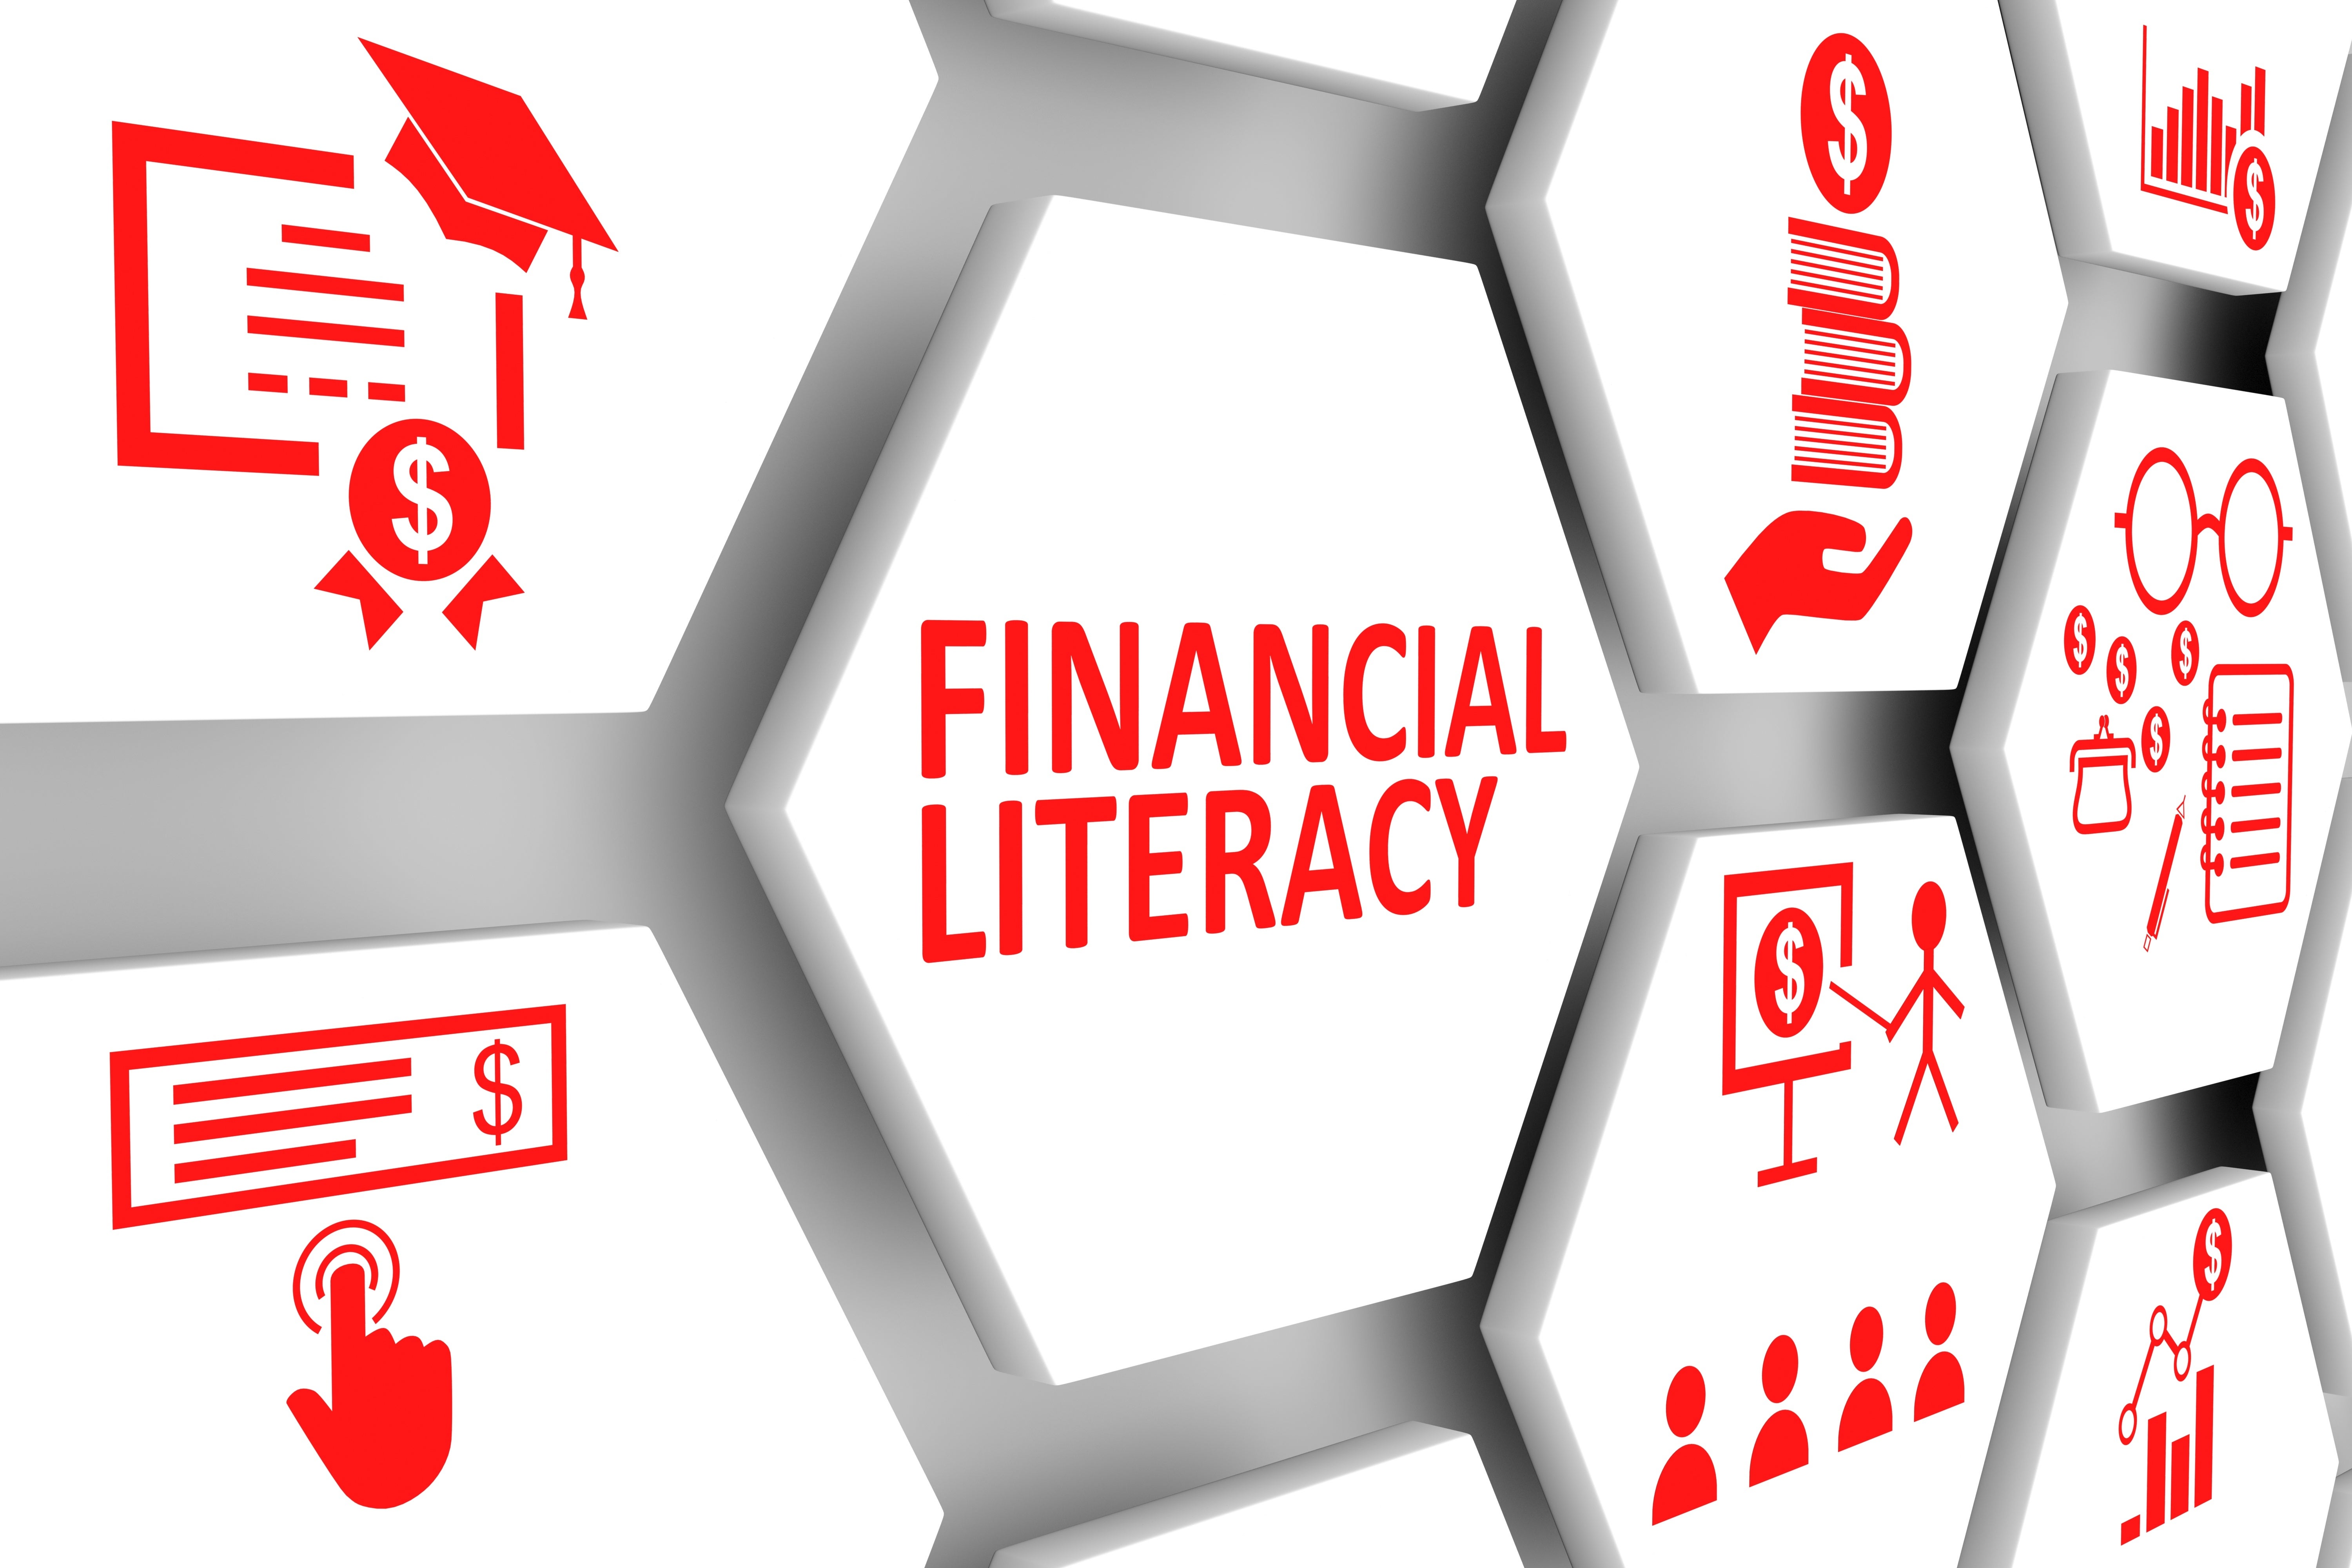 Financial Literacy courses